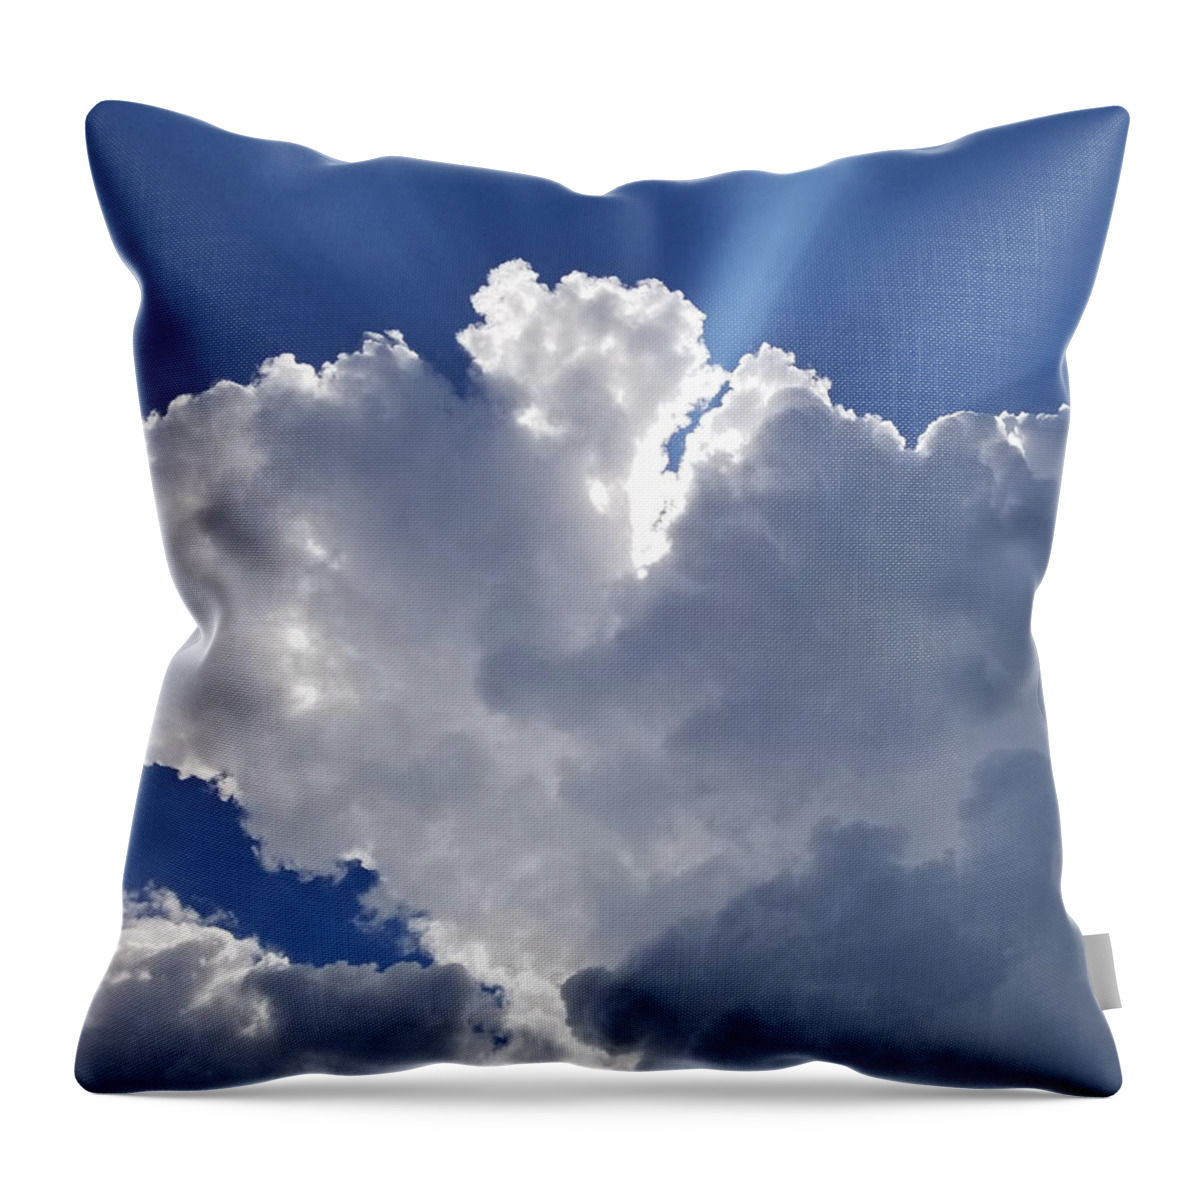 Clouds Throw Pillow featuring the painting Love at First Sight by Judith Rhue